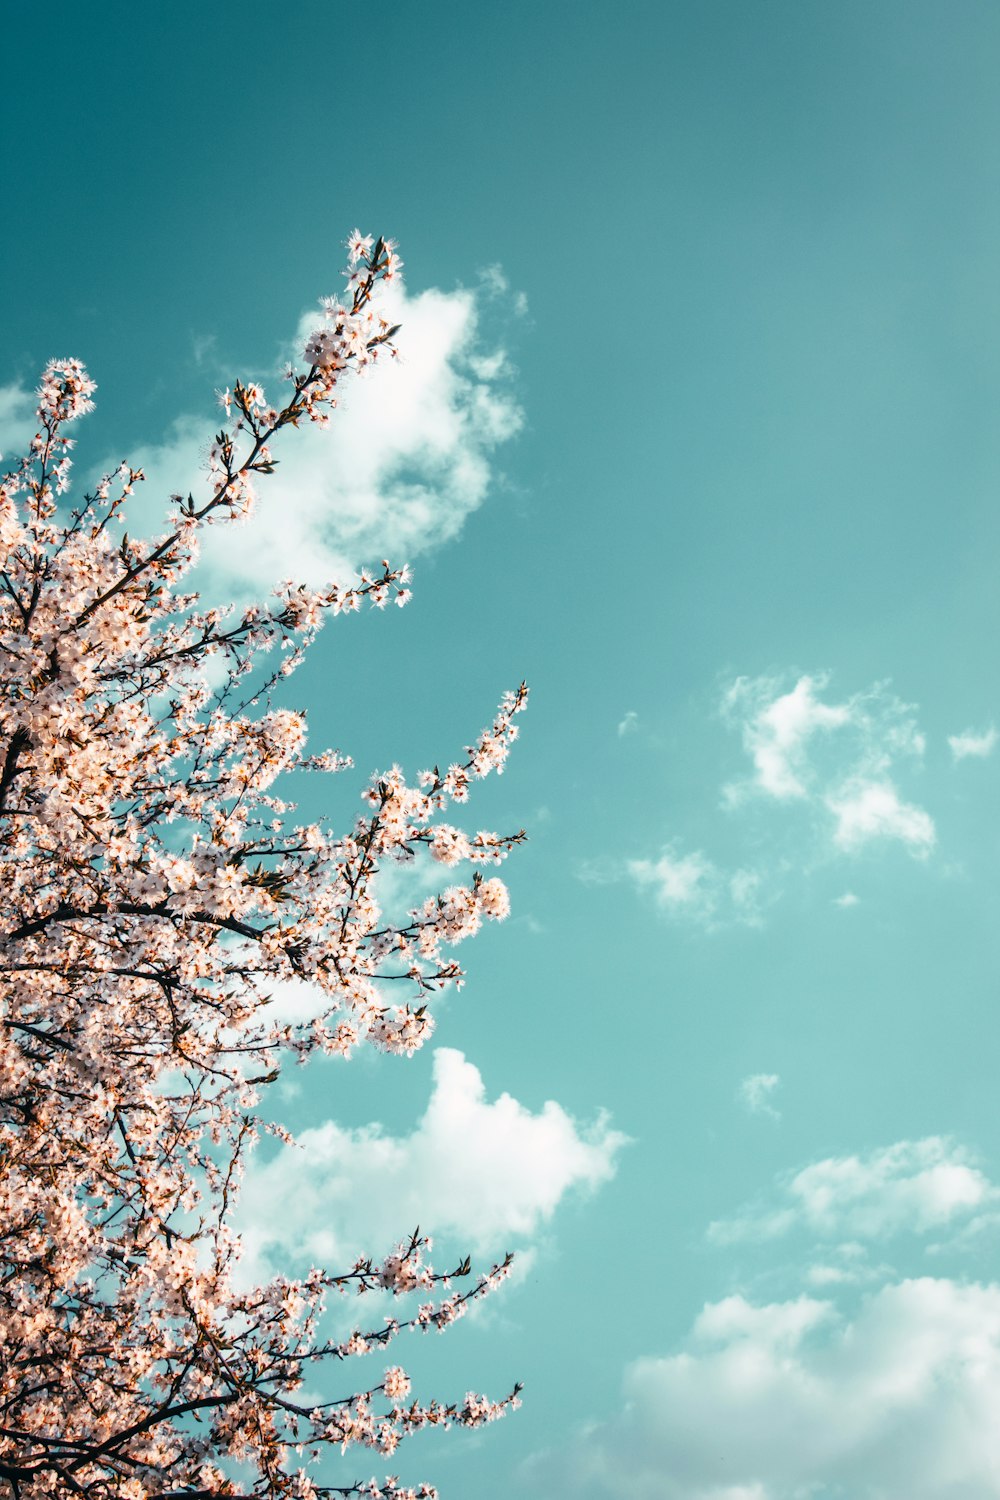 pink cherry blossom tree under blue sky and white clouds during daytime